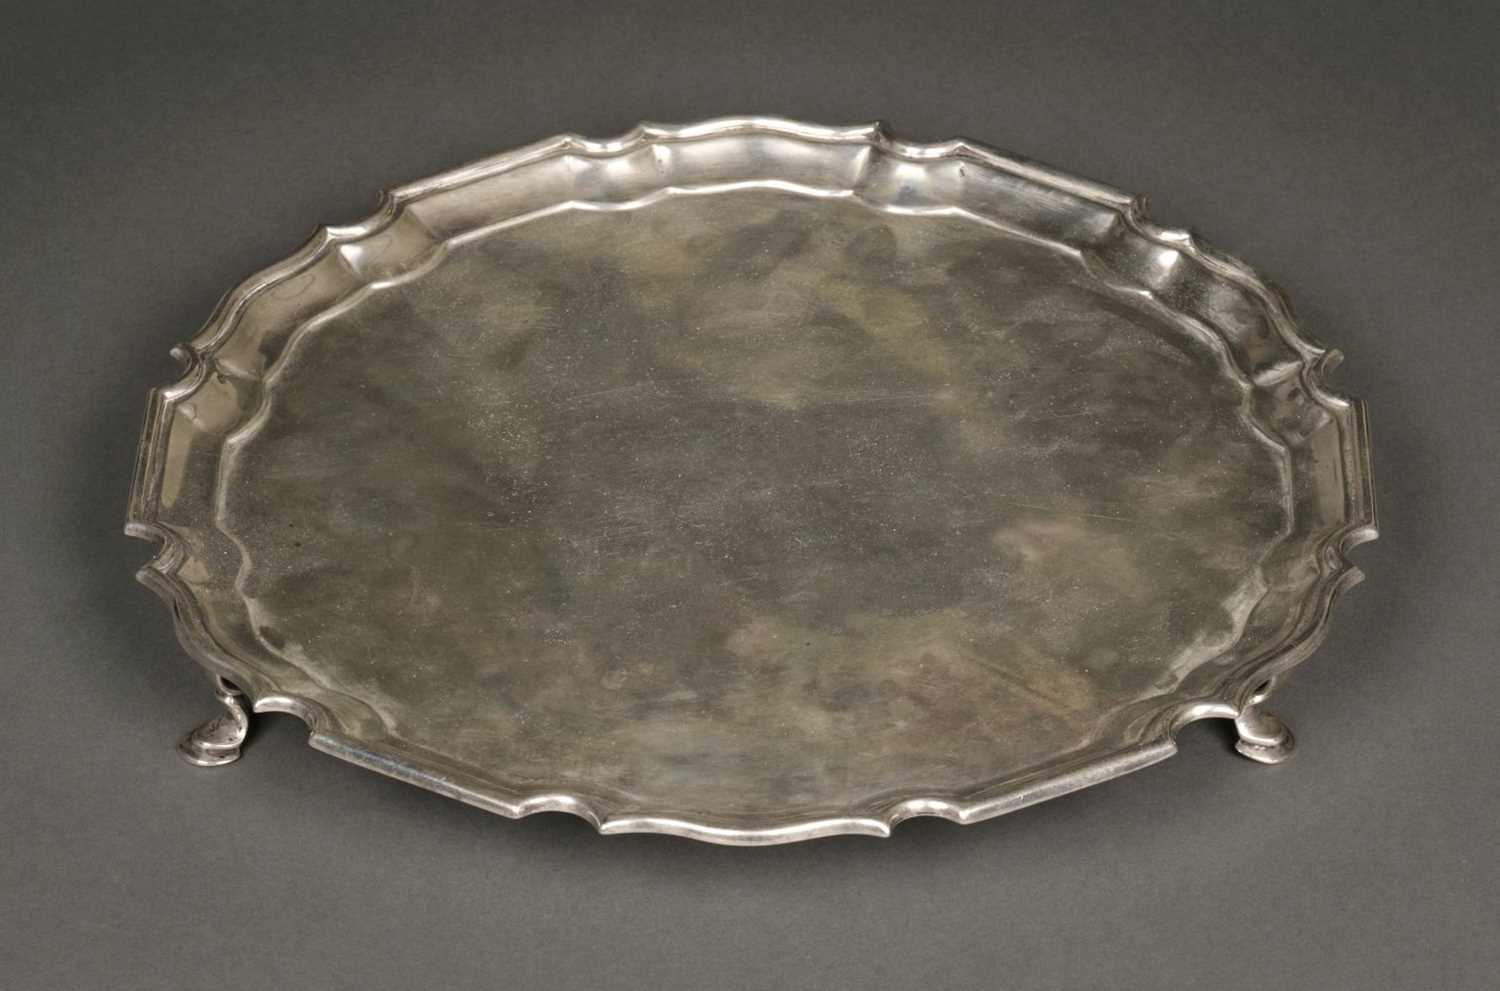 Lot 27 - Salver. George V silver salver by Mappin & Webb, London 1917